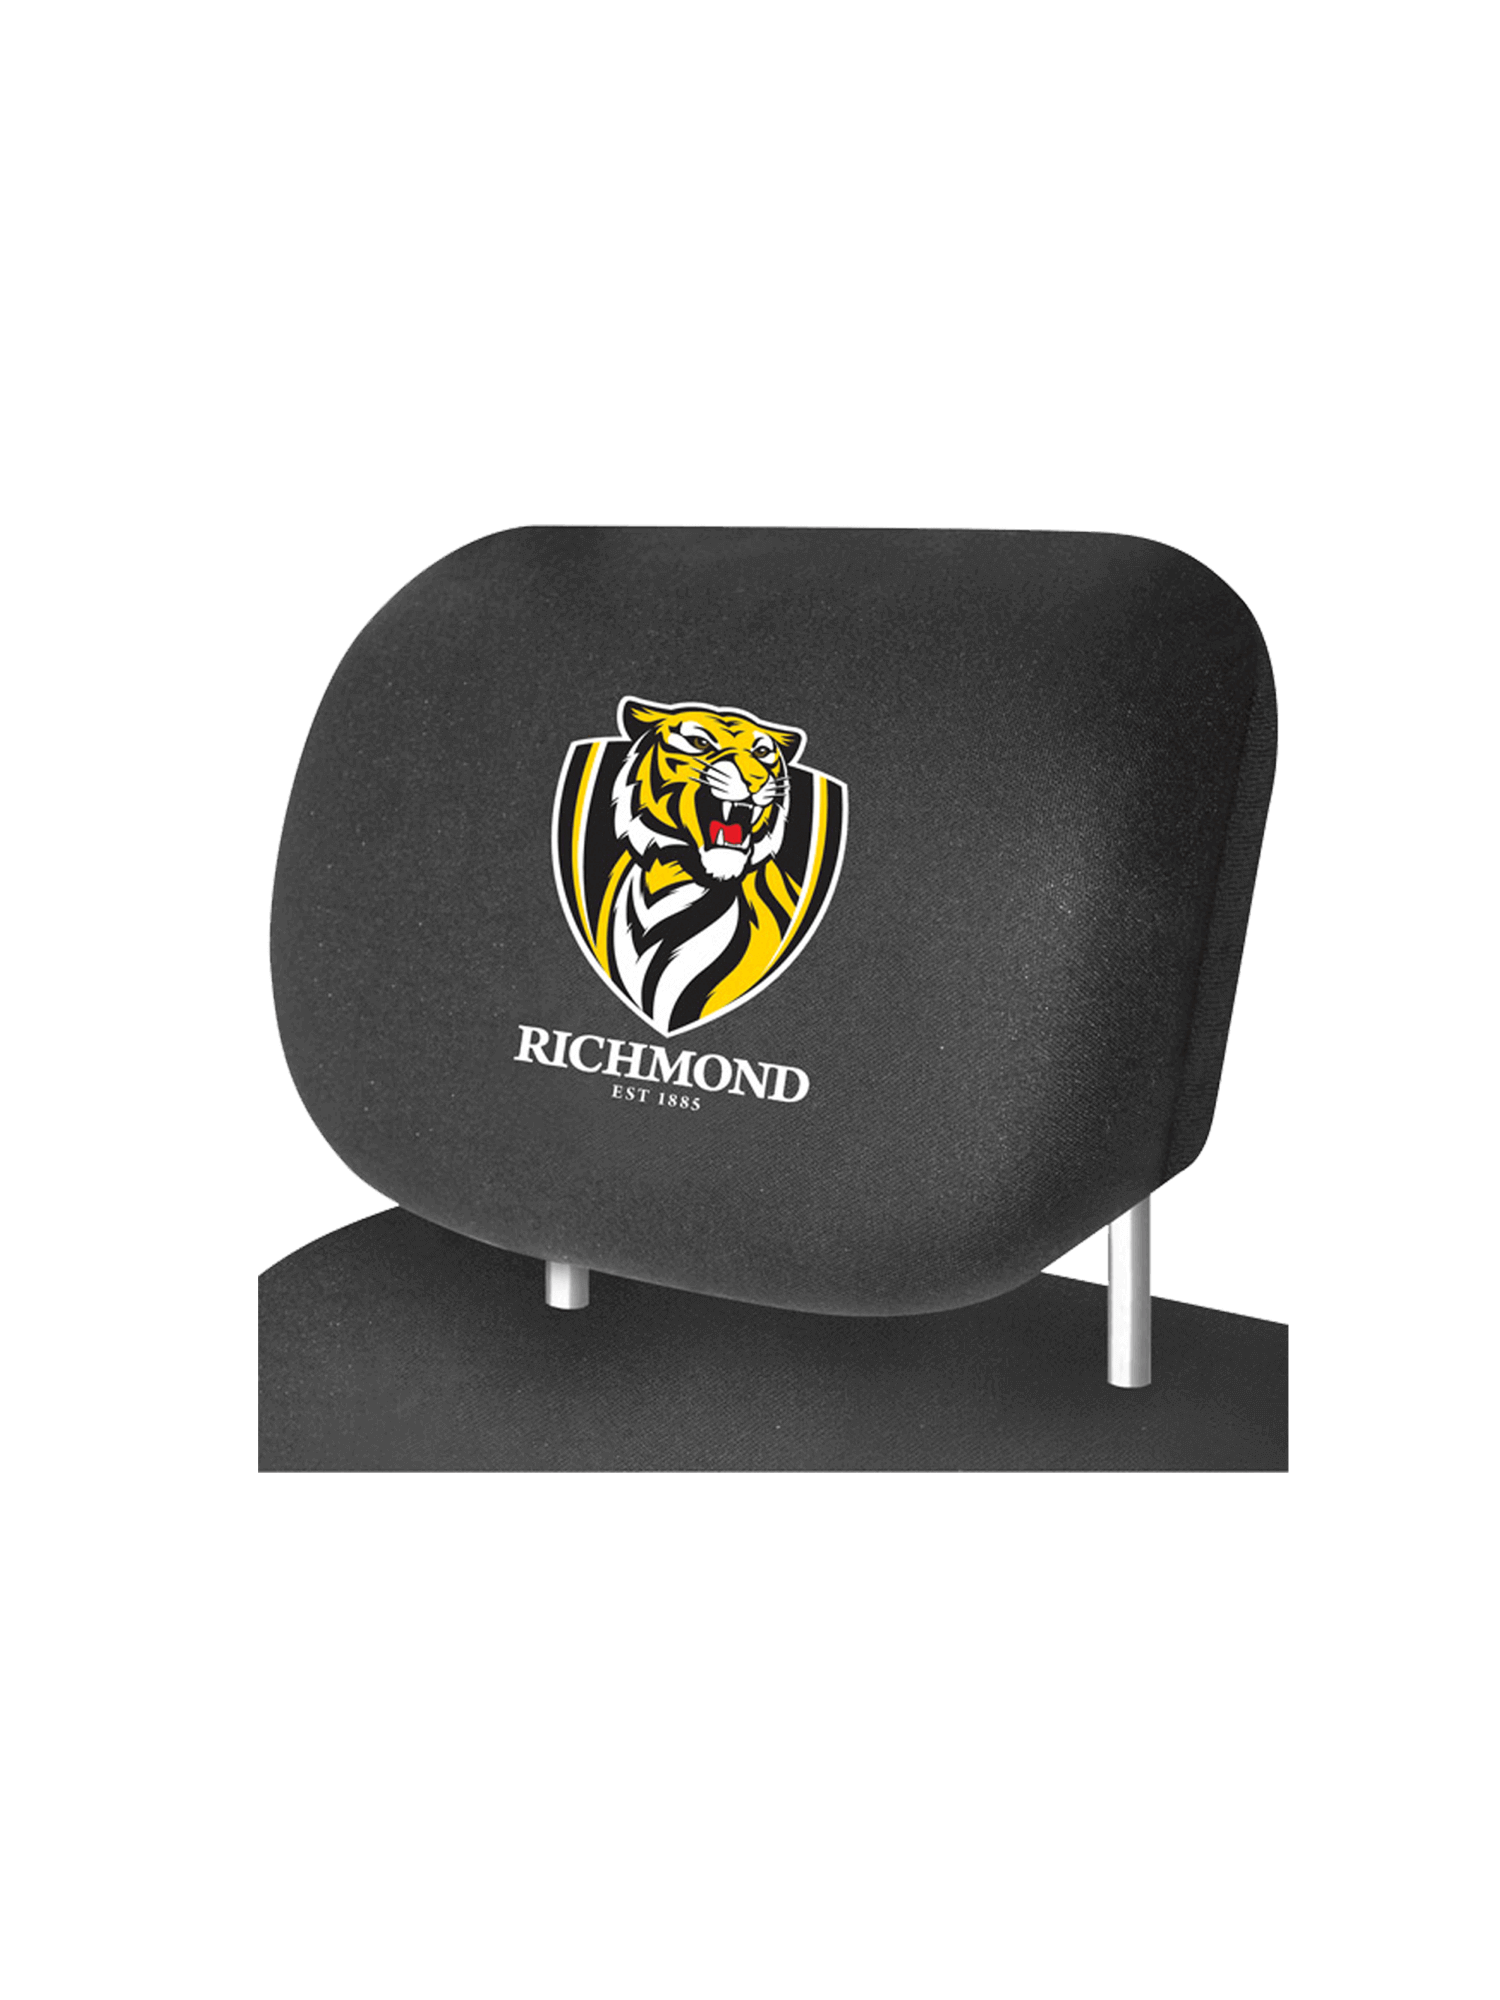 RICHMOND TIGERS OFFICIAL HEADREST COVER_RICHMOND TIGERS_STUBBY CLUB